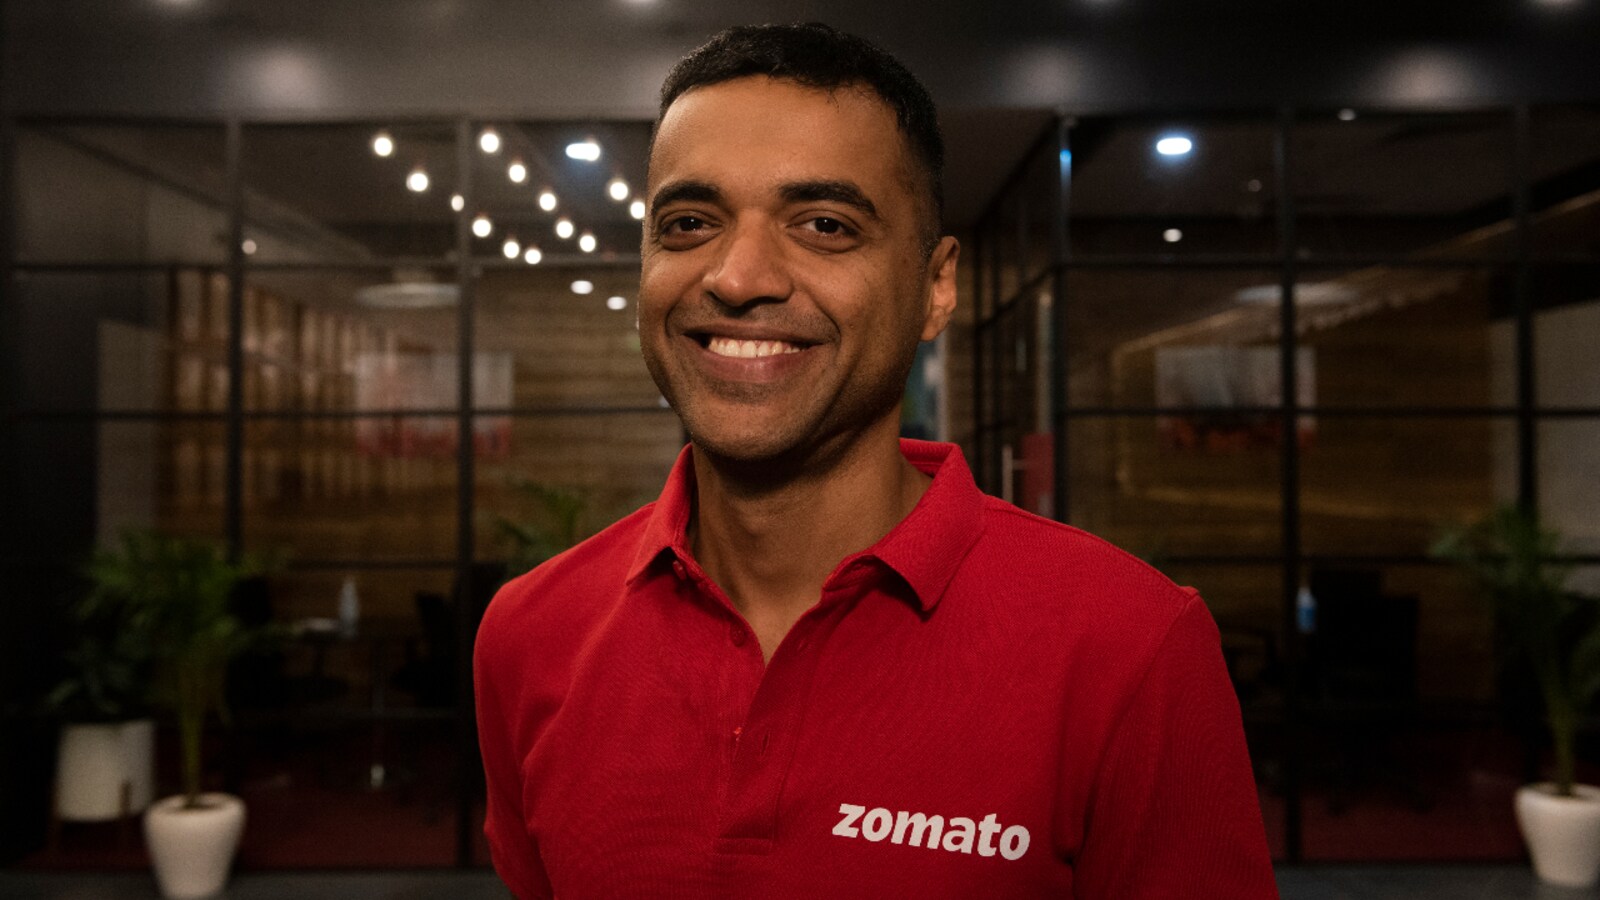 https://images.moneycontrol.com/static-mcnews/2021/12/Zomato-CEO-Deepinder-Goyal-1.jpg?impolicy=website&width=1600&height=900